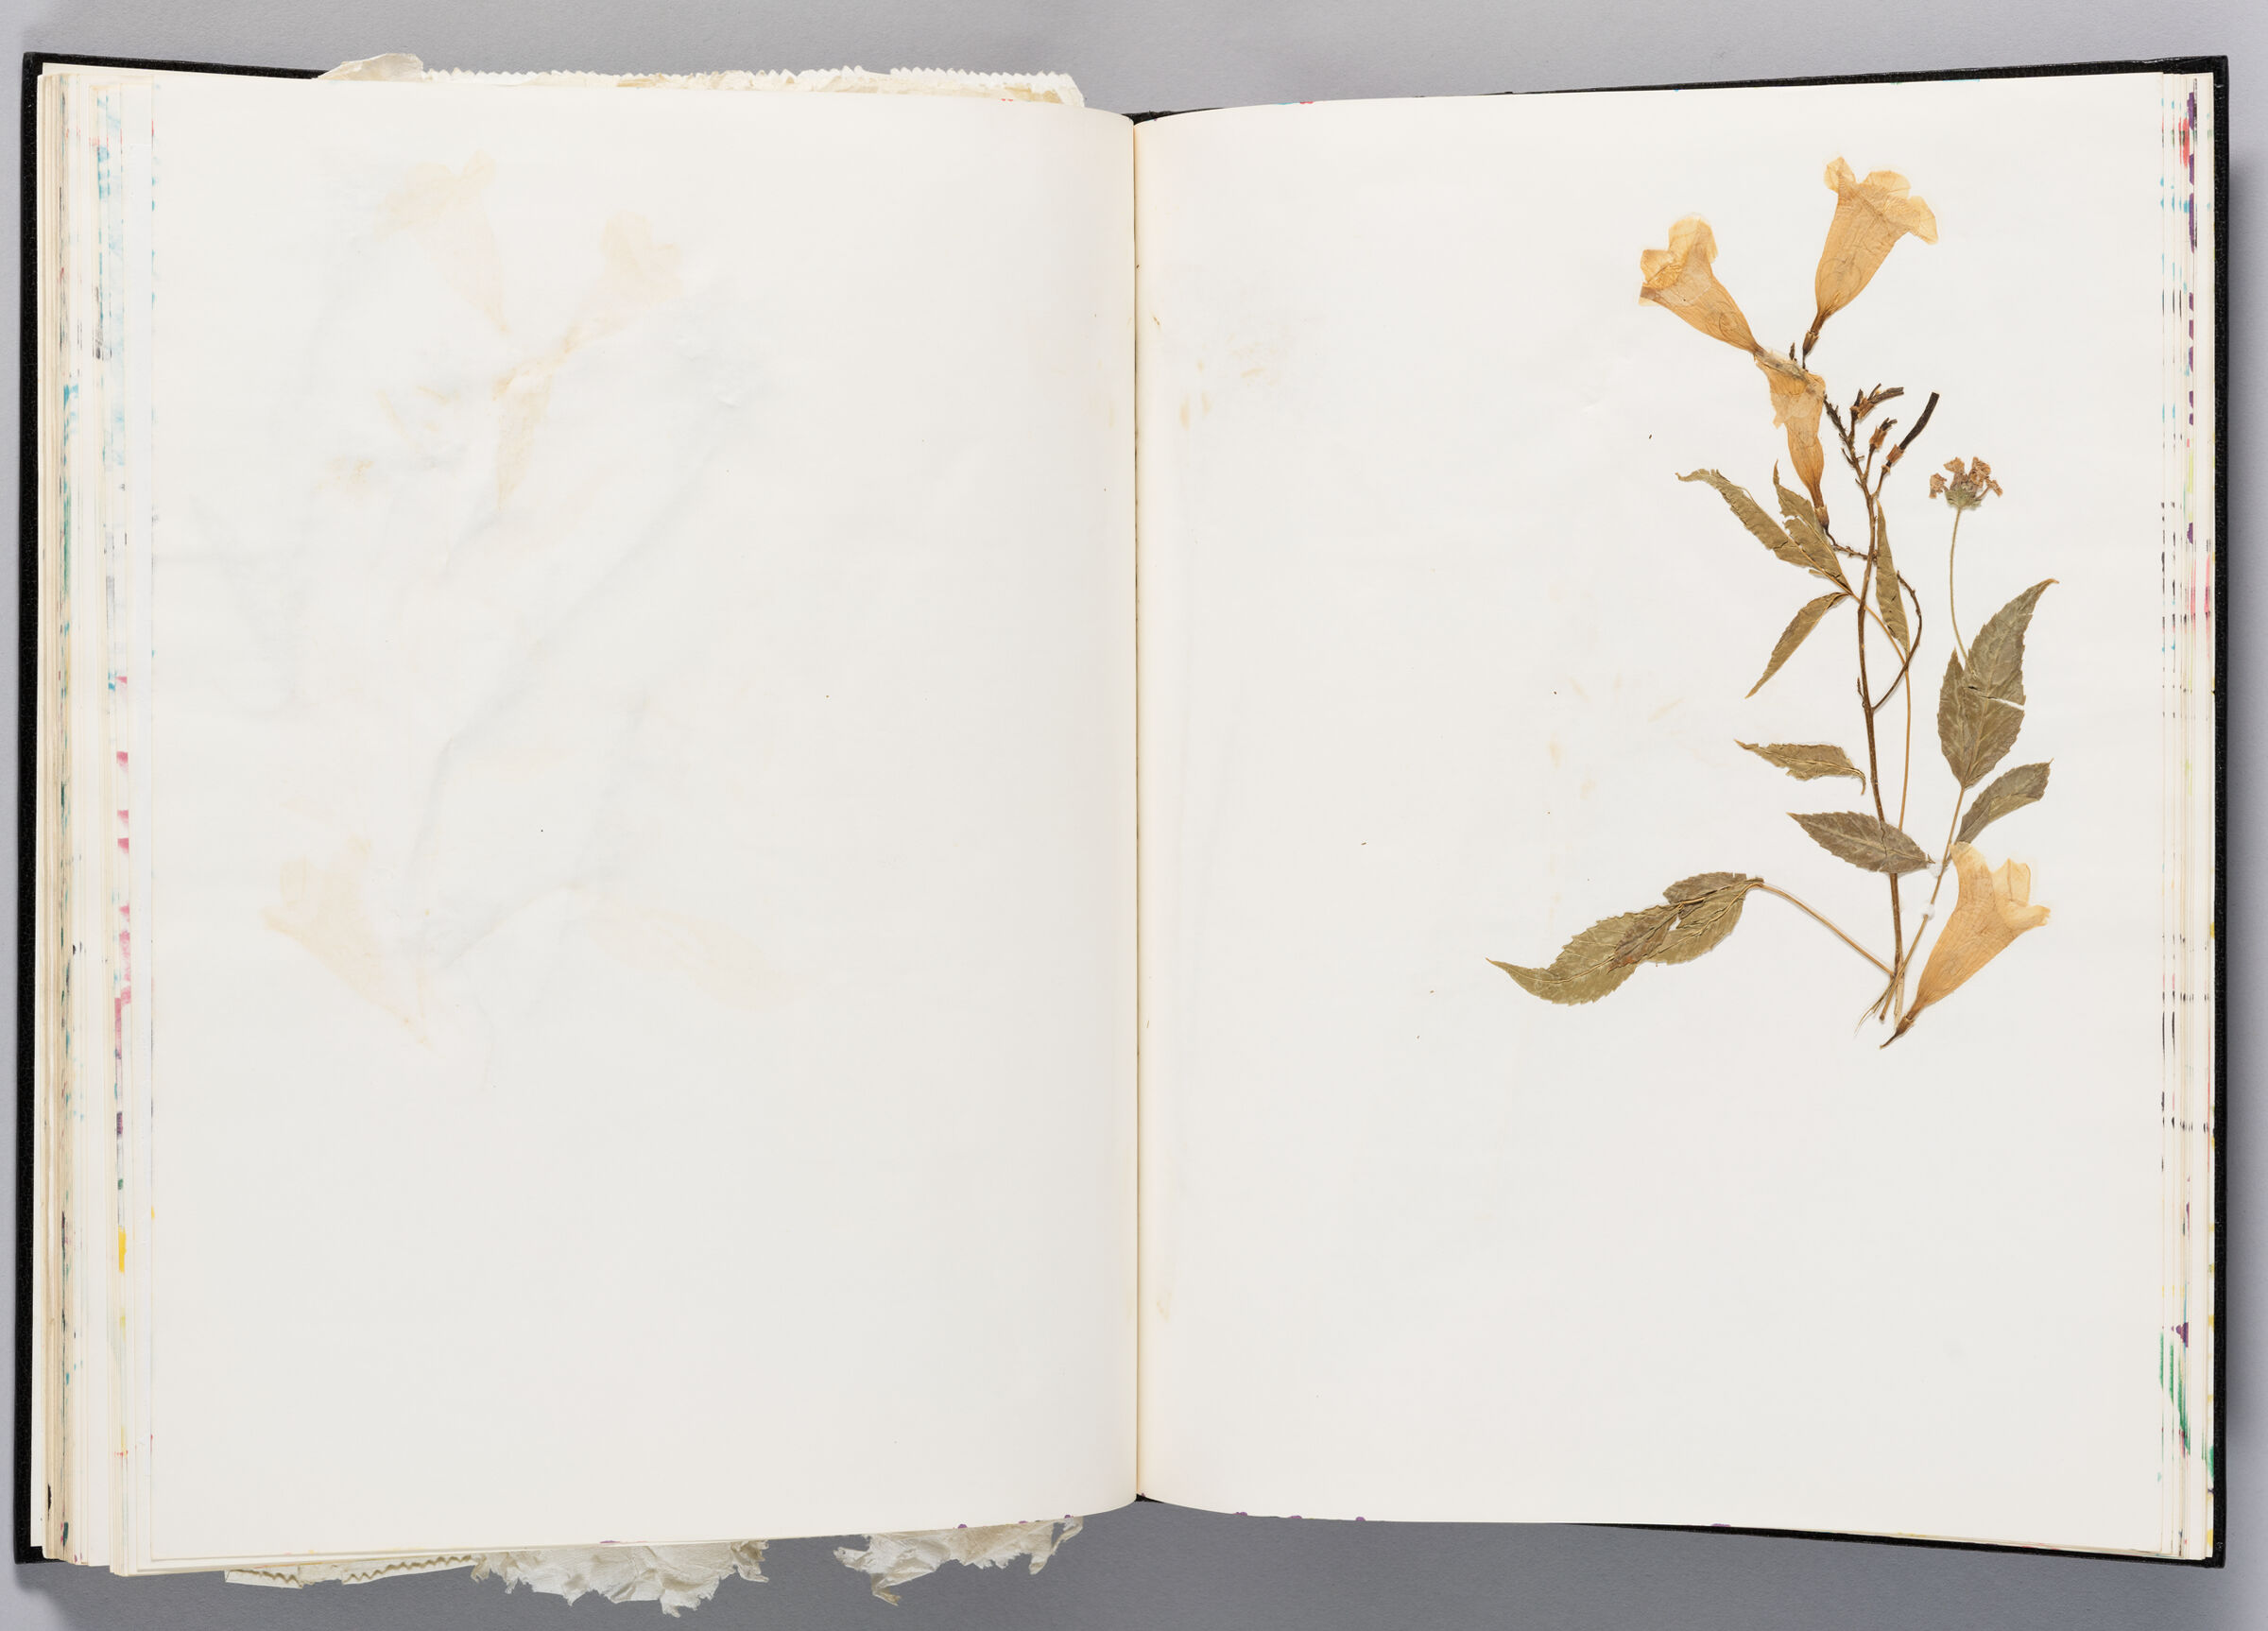 Untitled (Blank, Left Page); Untitled (Pressed Flowers, Right Page)